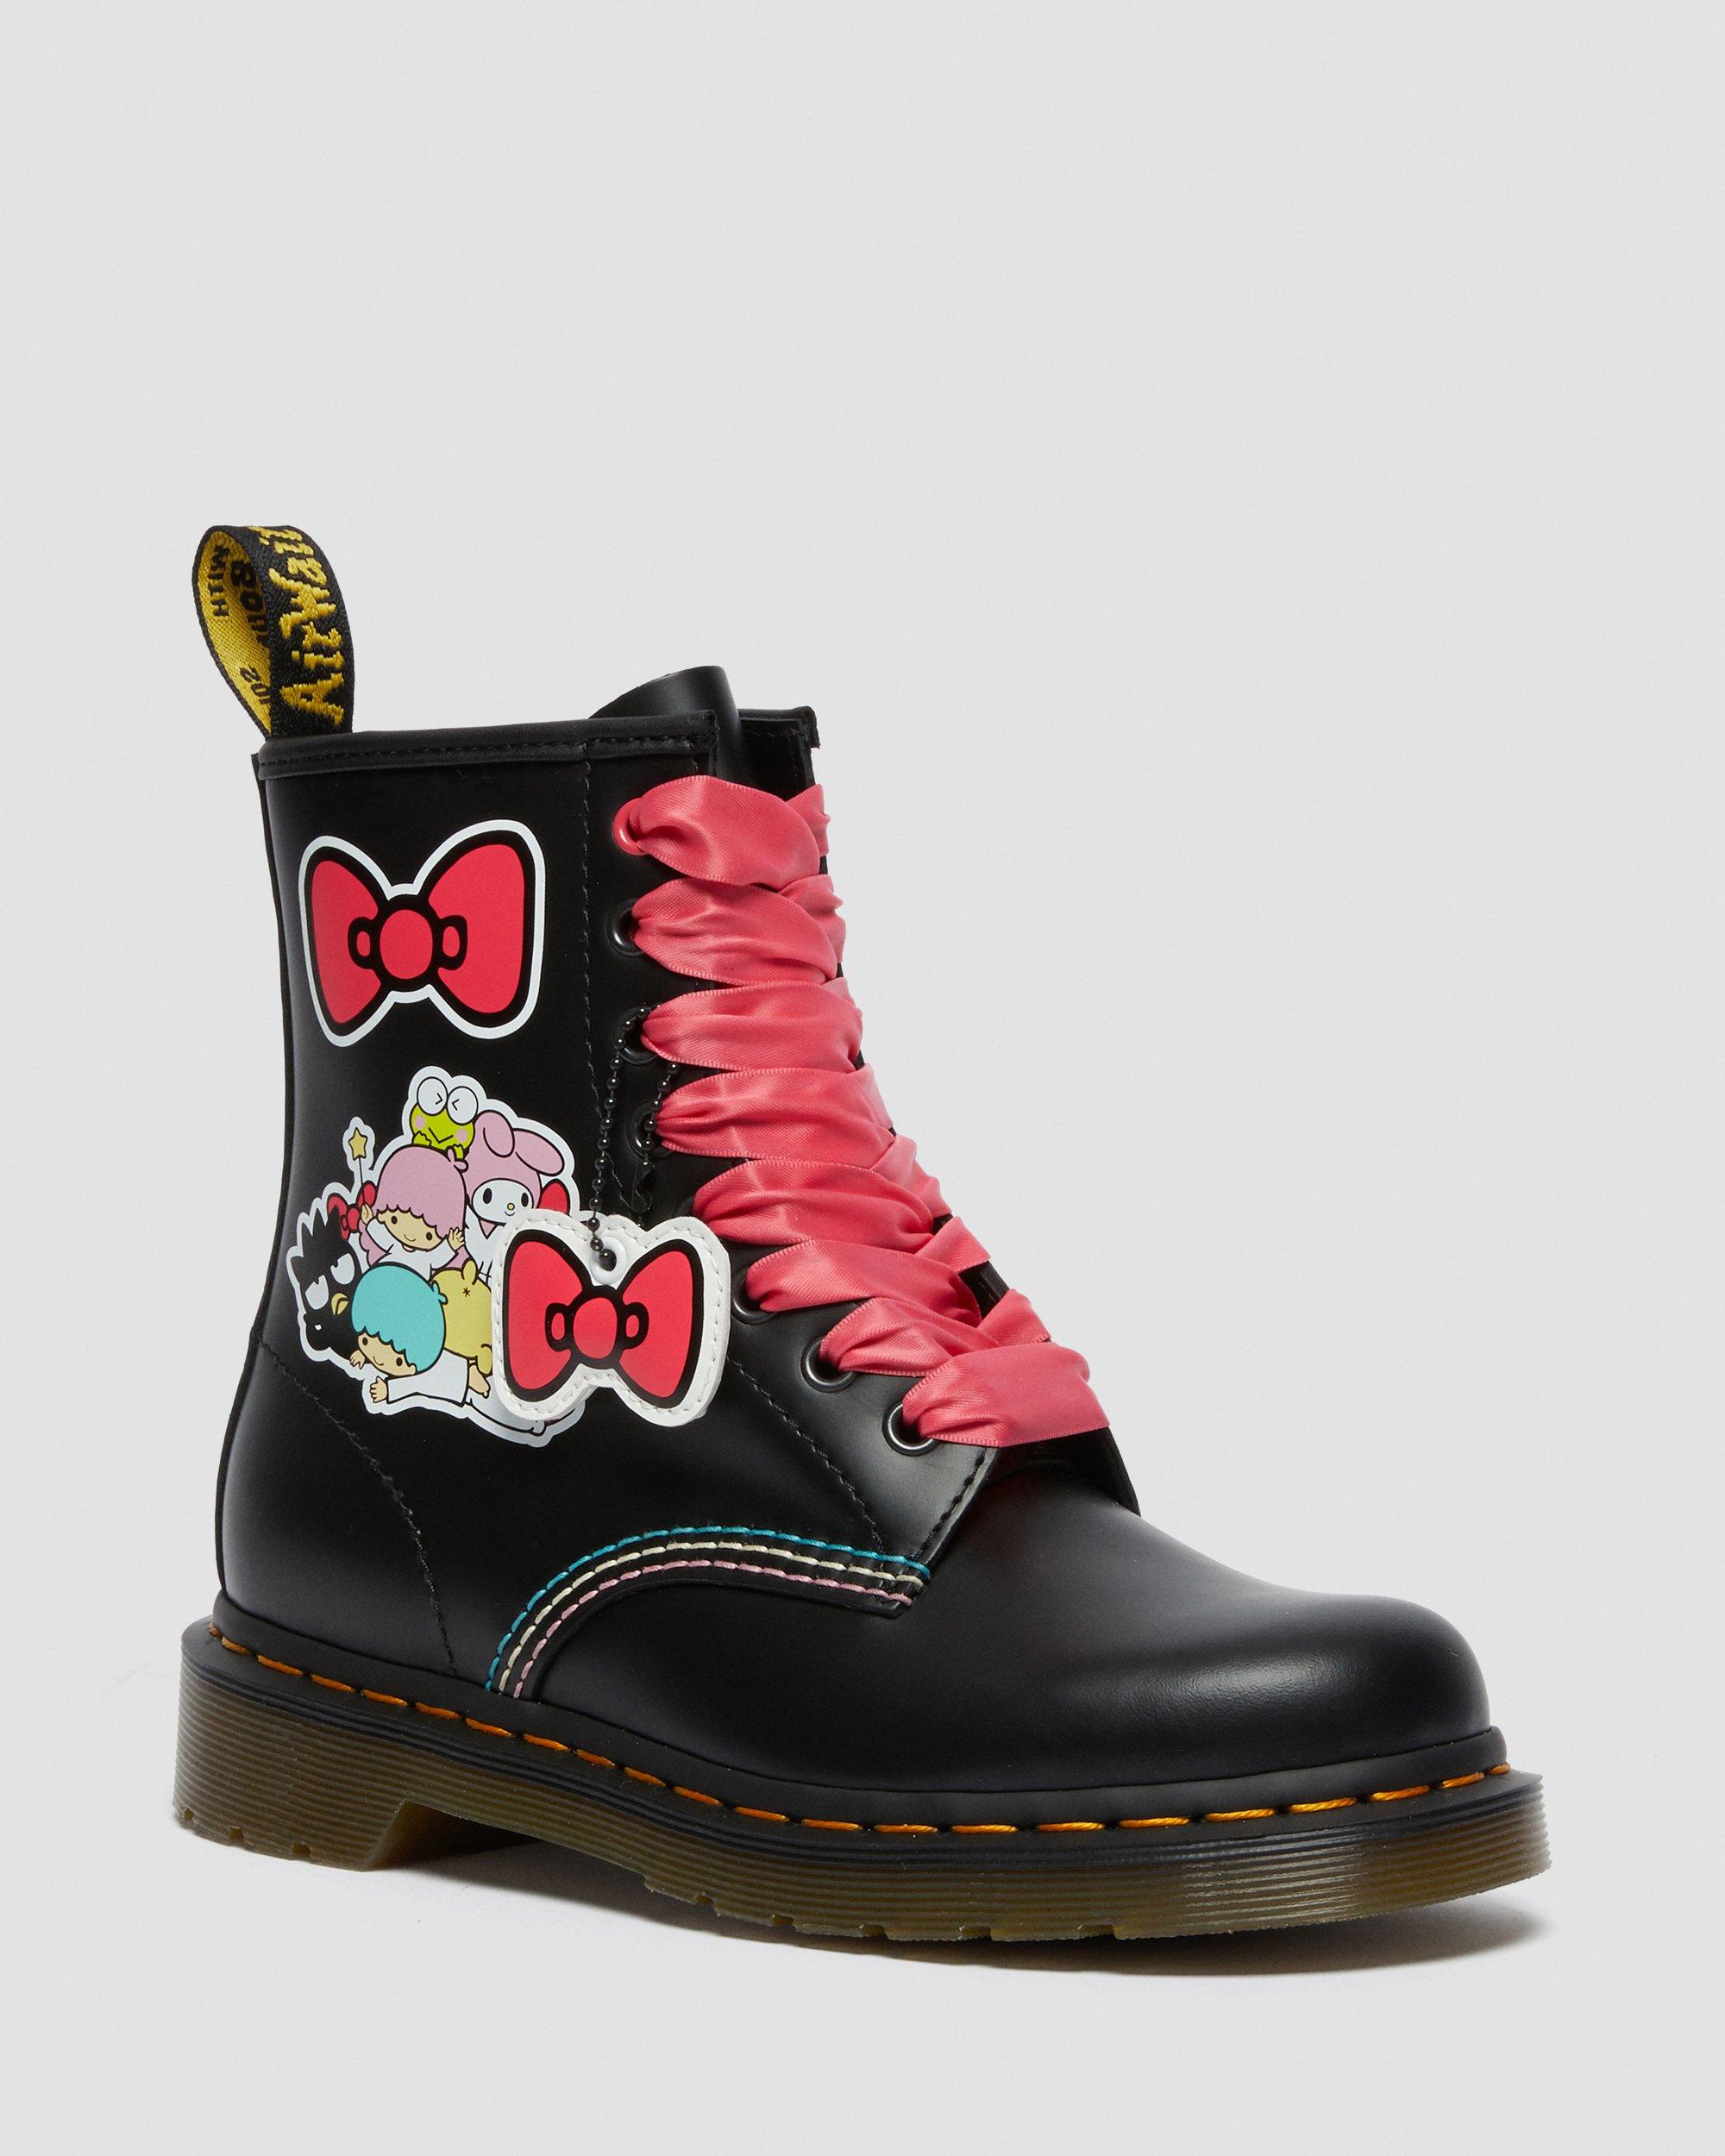 DR MARTENS Hello Kitty & Friends 1460 Smooth Leather Lace Up Boots